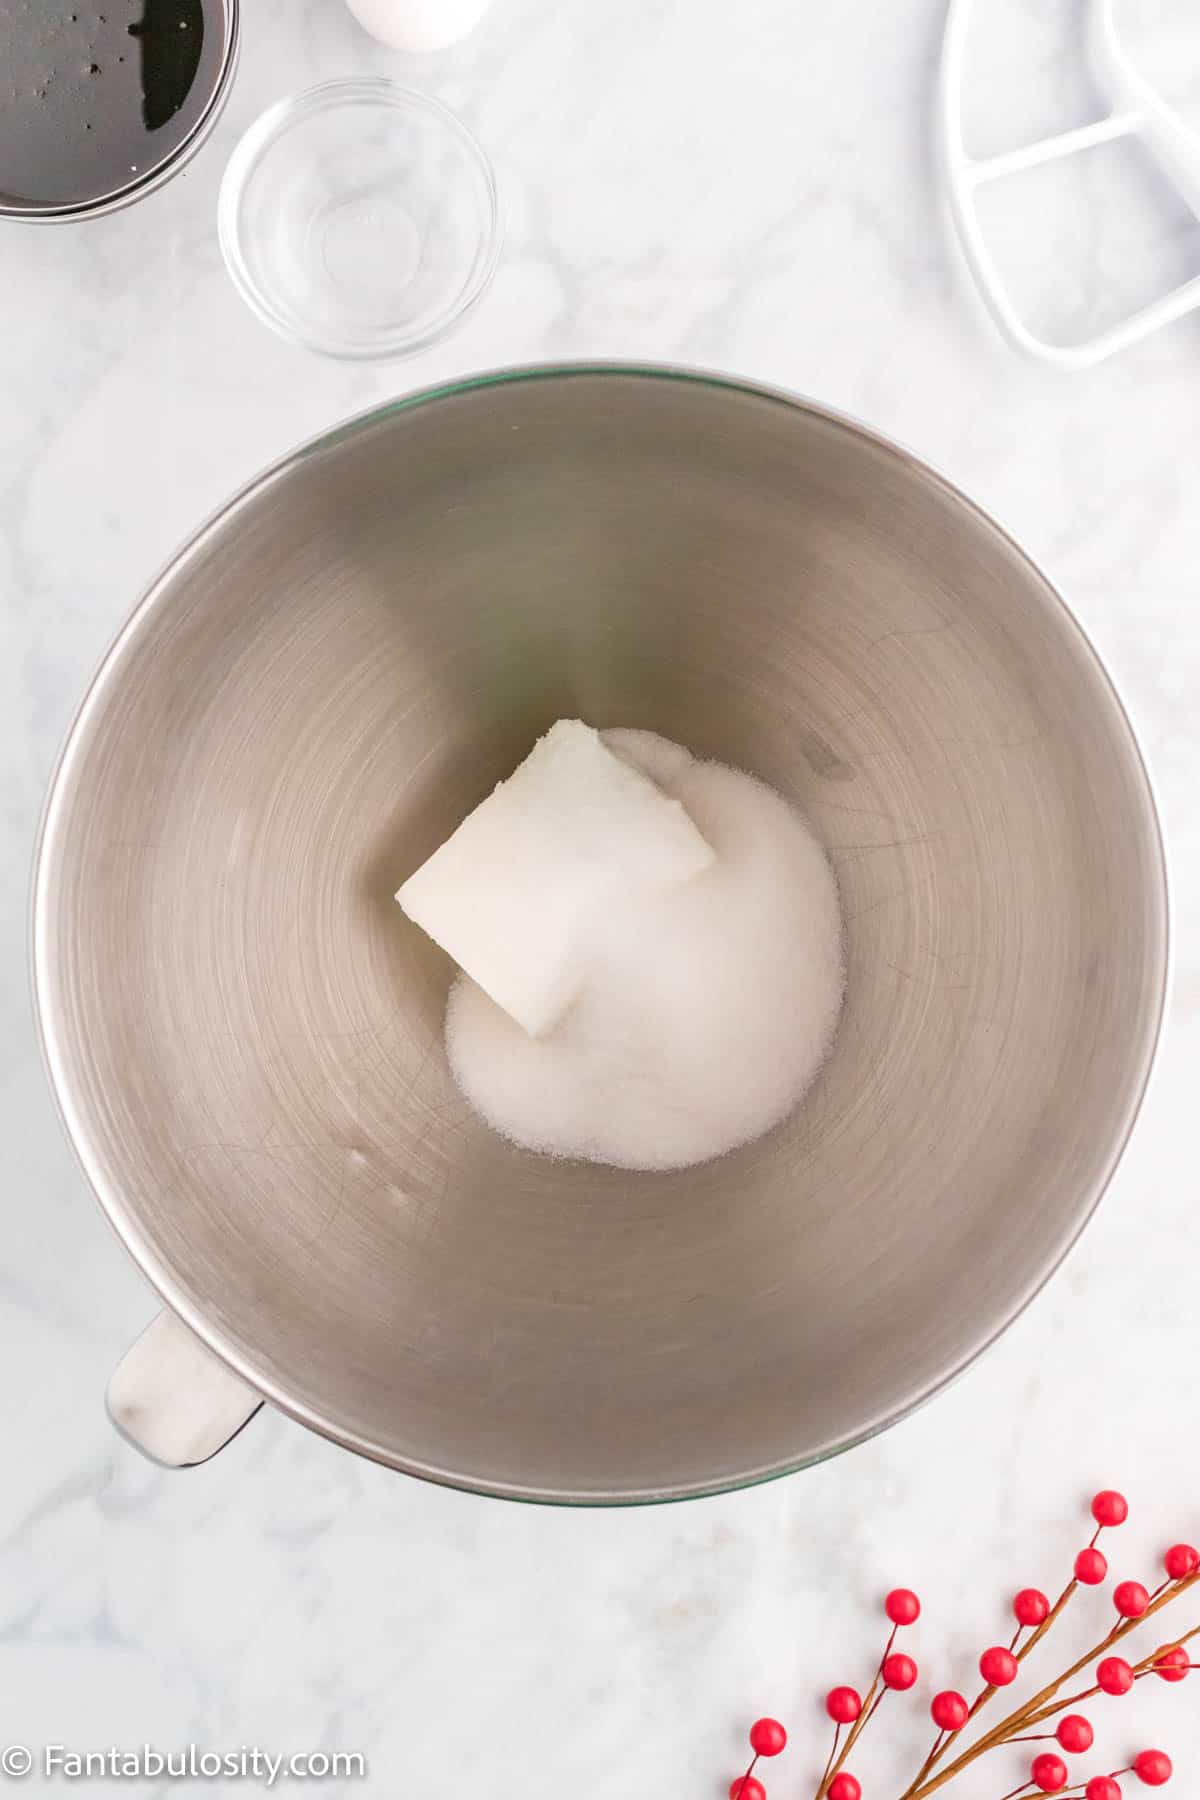 Sugar and shortening and shown in a metal mixing bowl